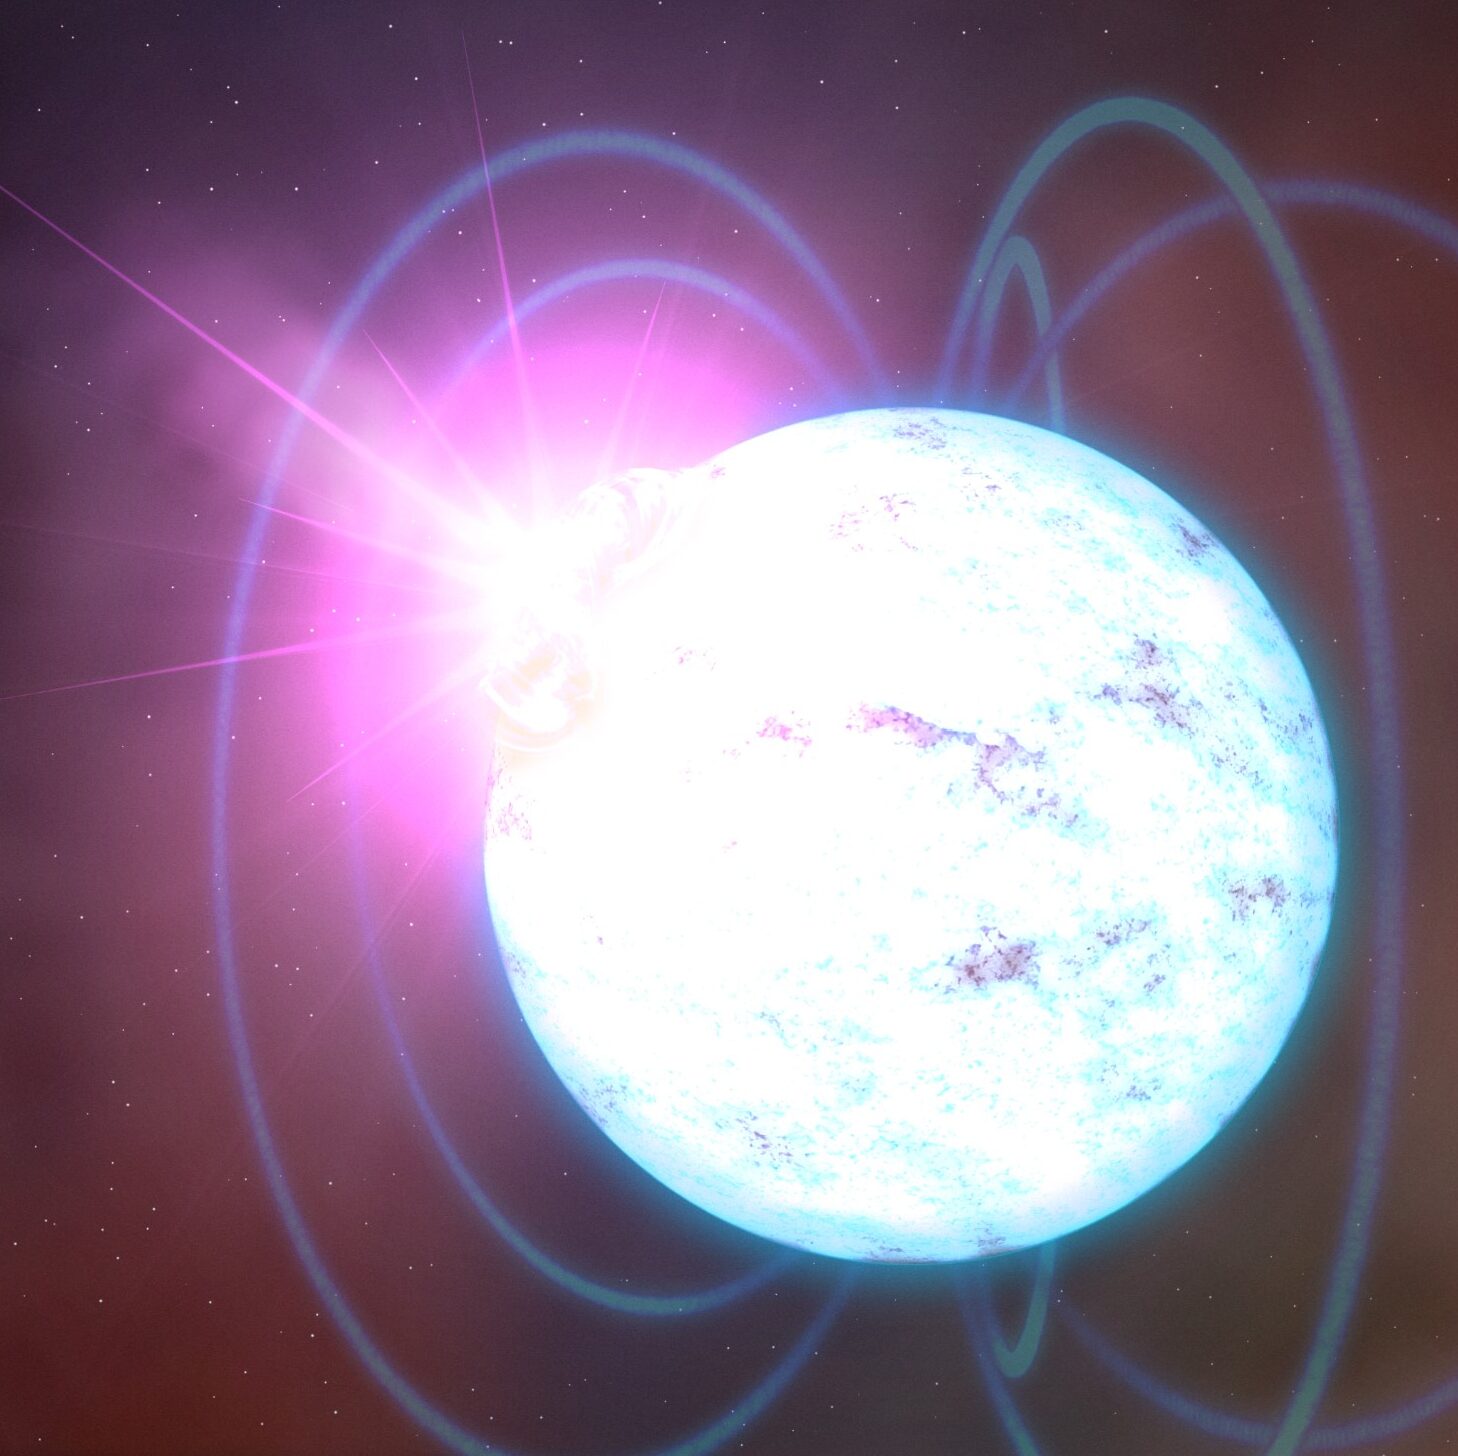 artistic image of a magnetar, with a big burst of energy coming off one side and magnetic field lines drawn around the magnetar